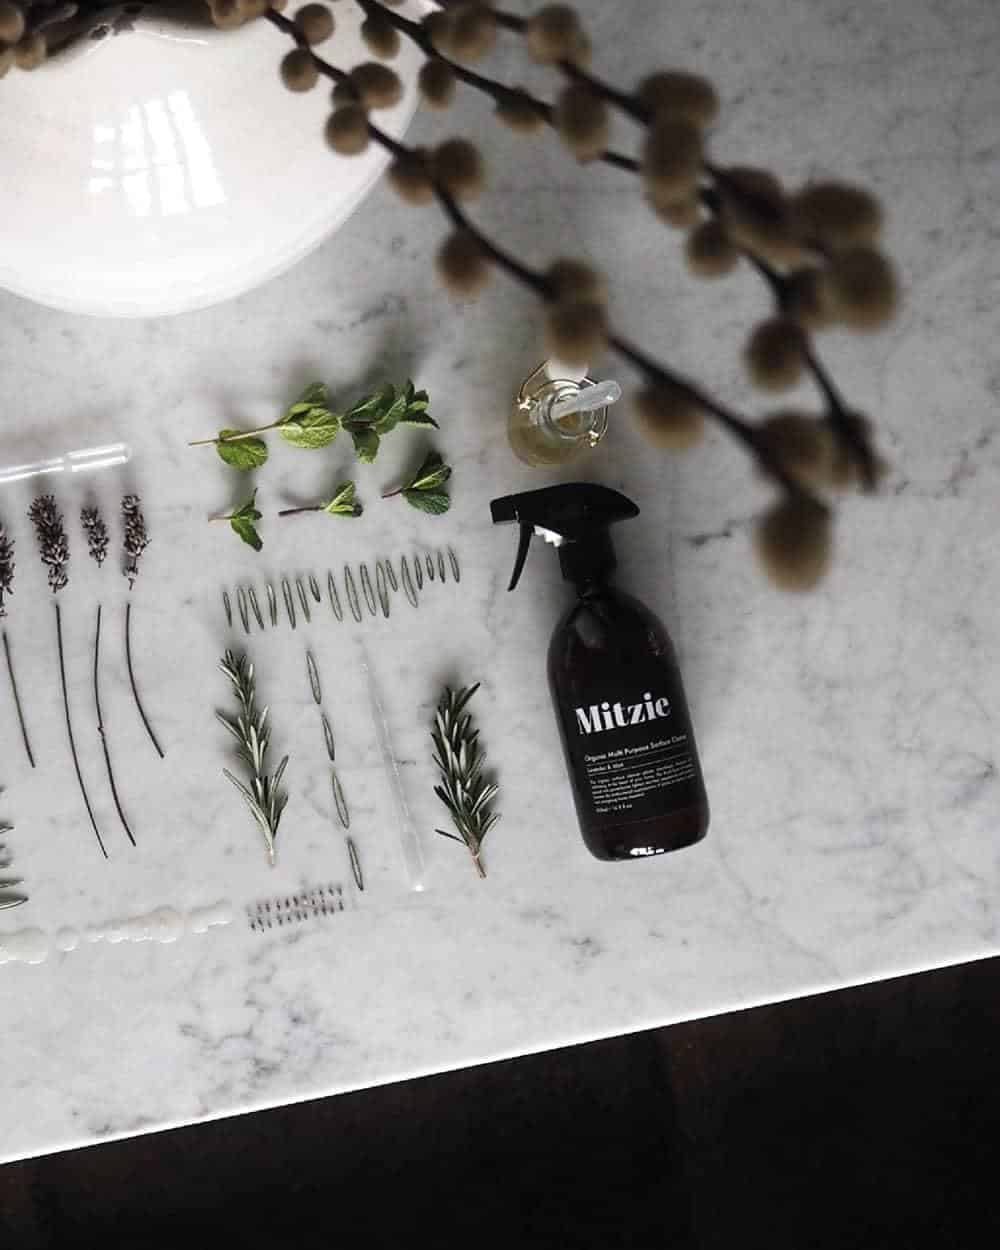 A cleaning spray bottle and dried herbs